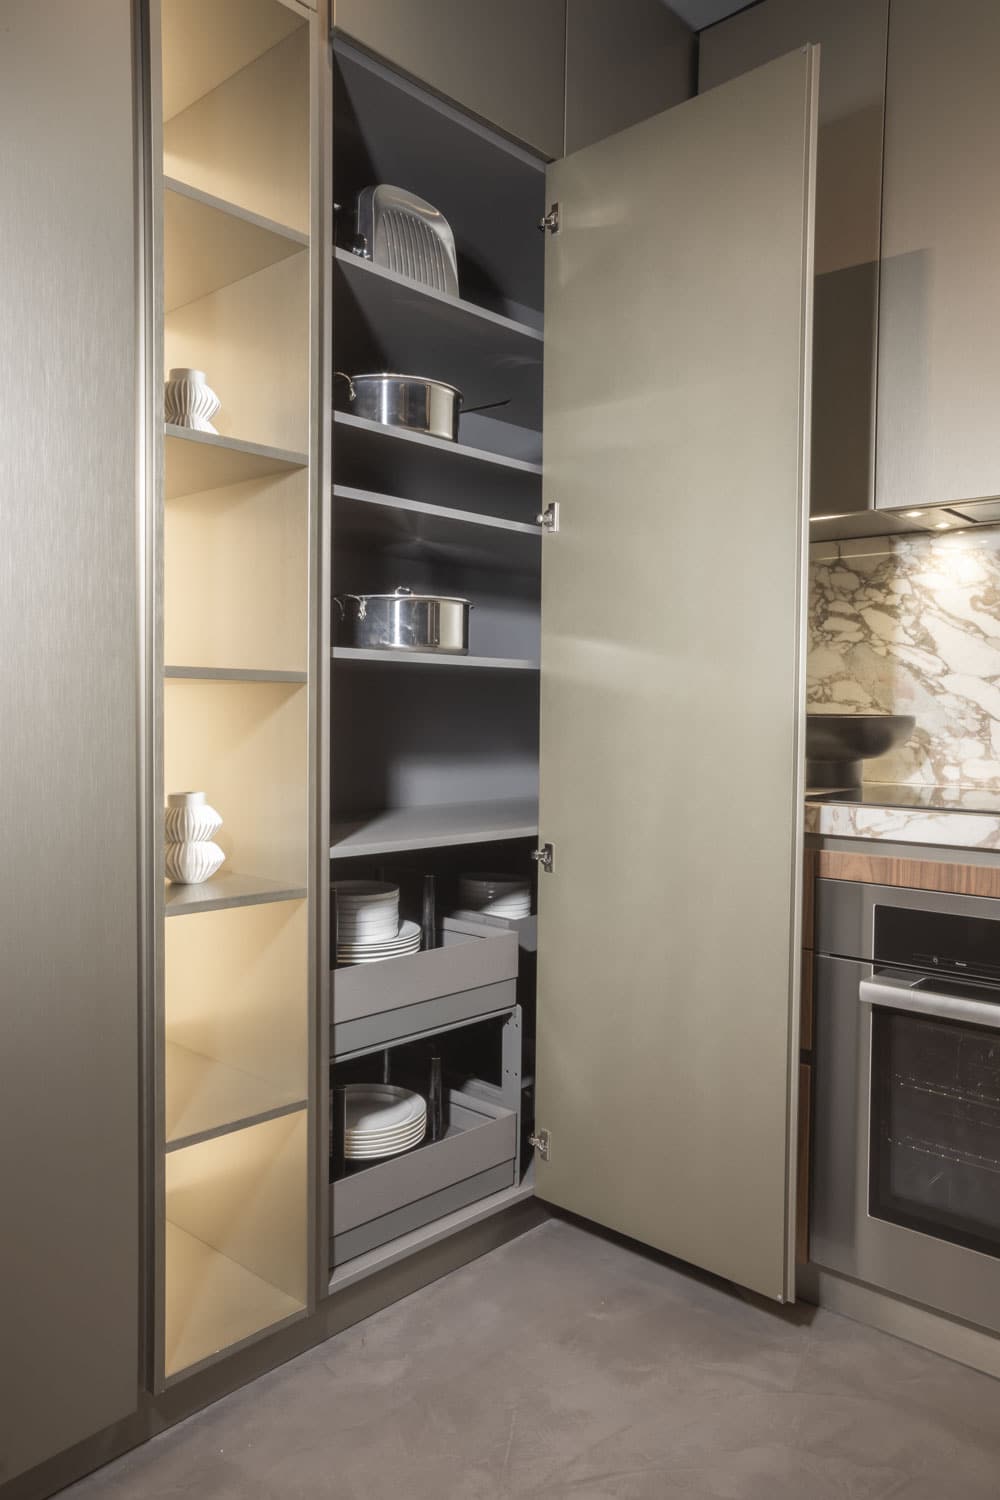 In the corner pantry units, double sets of fully-extractable storage baskets allow you to make the most of the space.